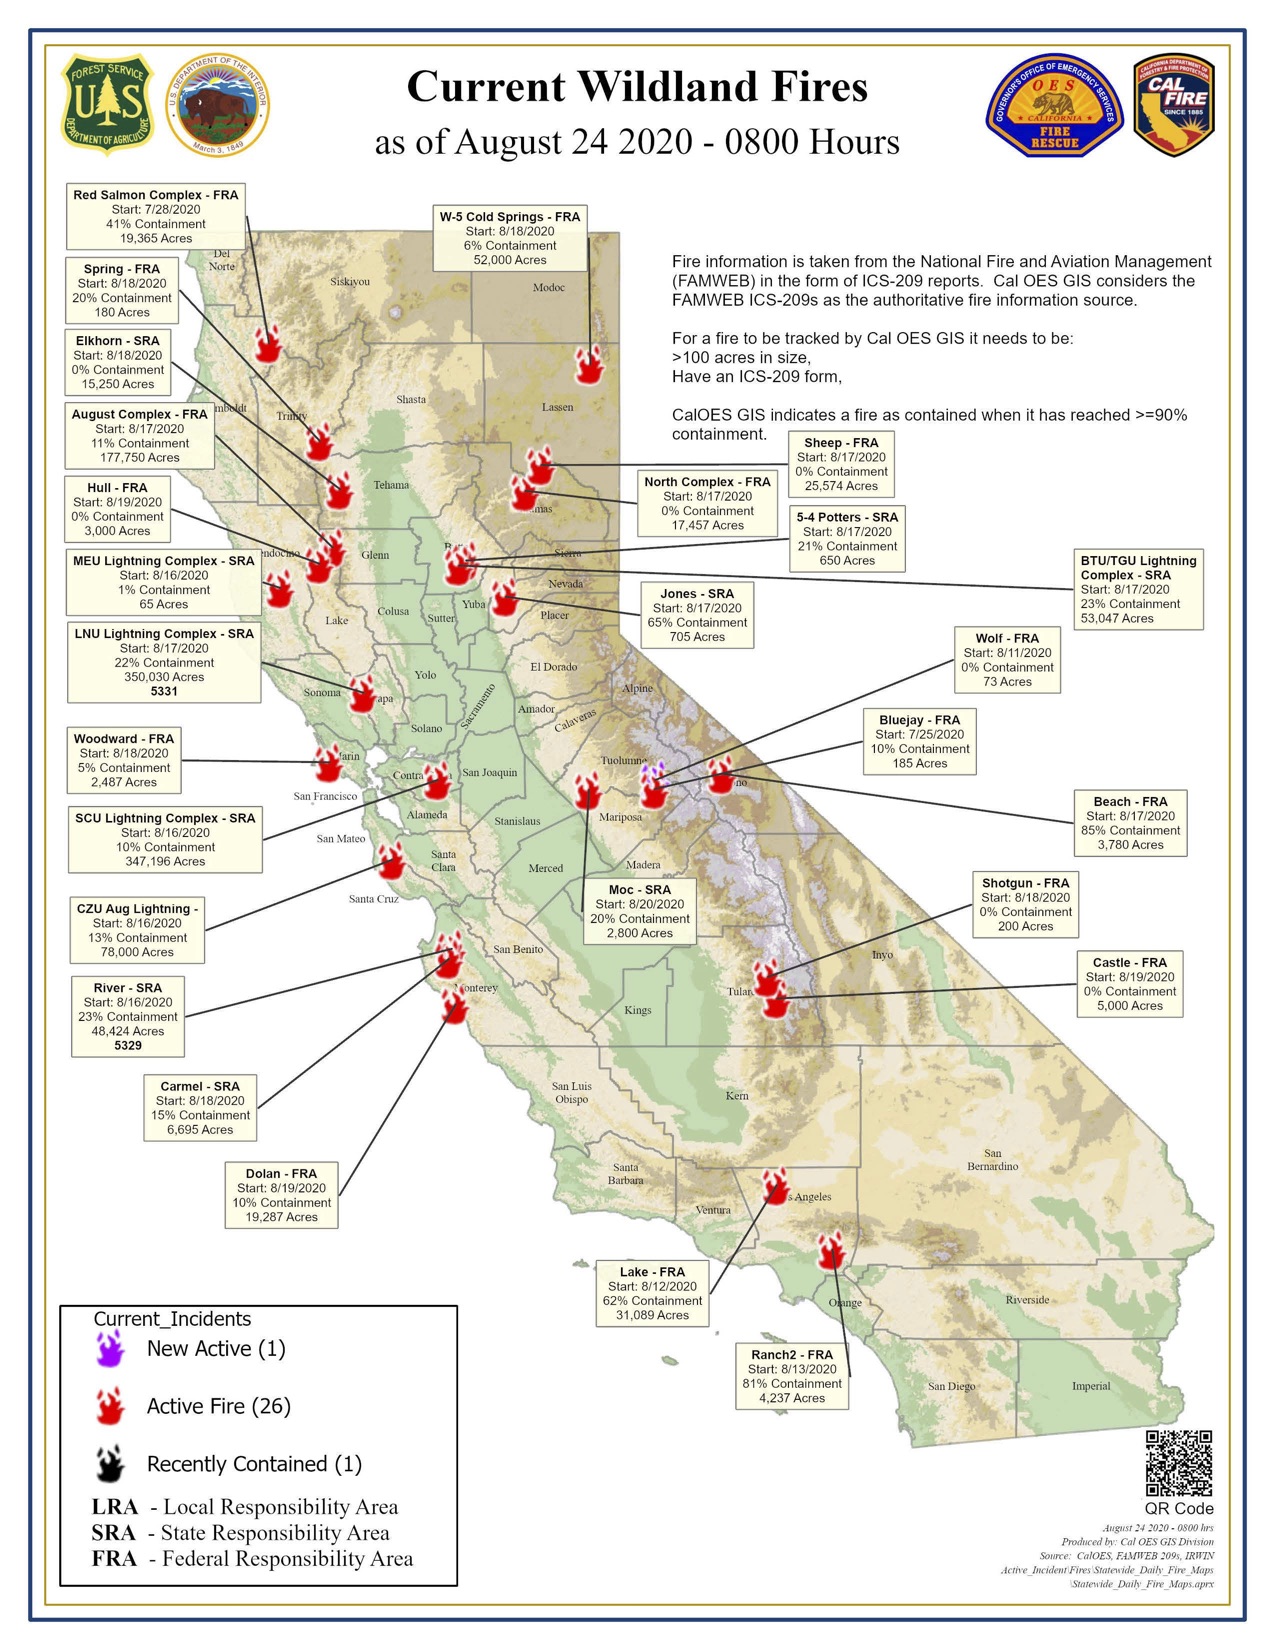 Maps: See where wildfires are burning and who’s being evacuated in the ...